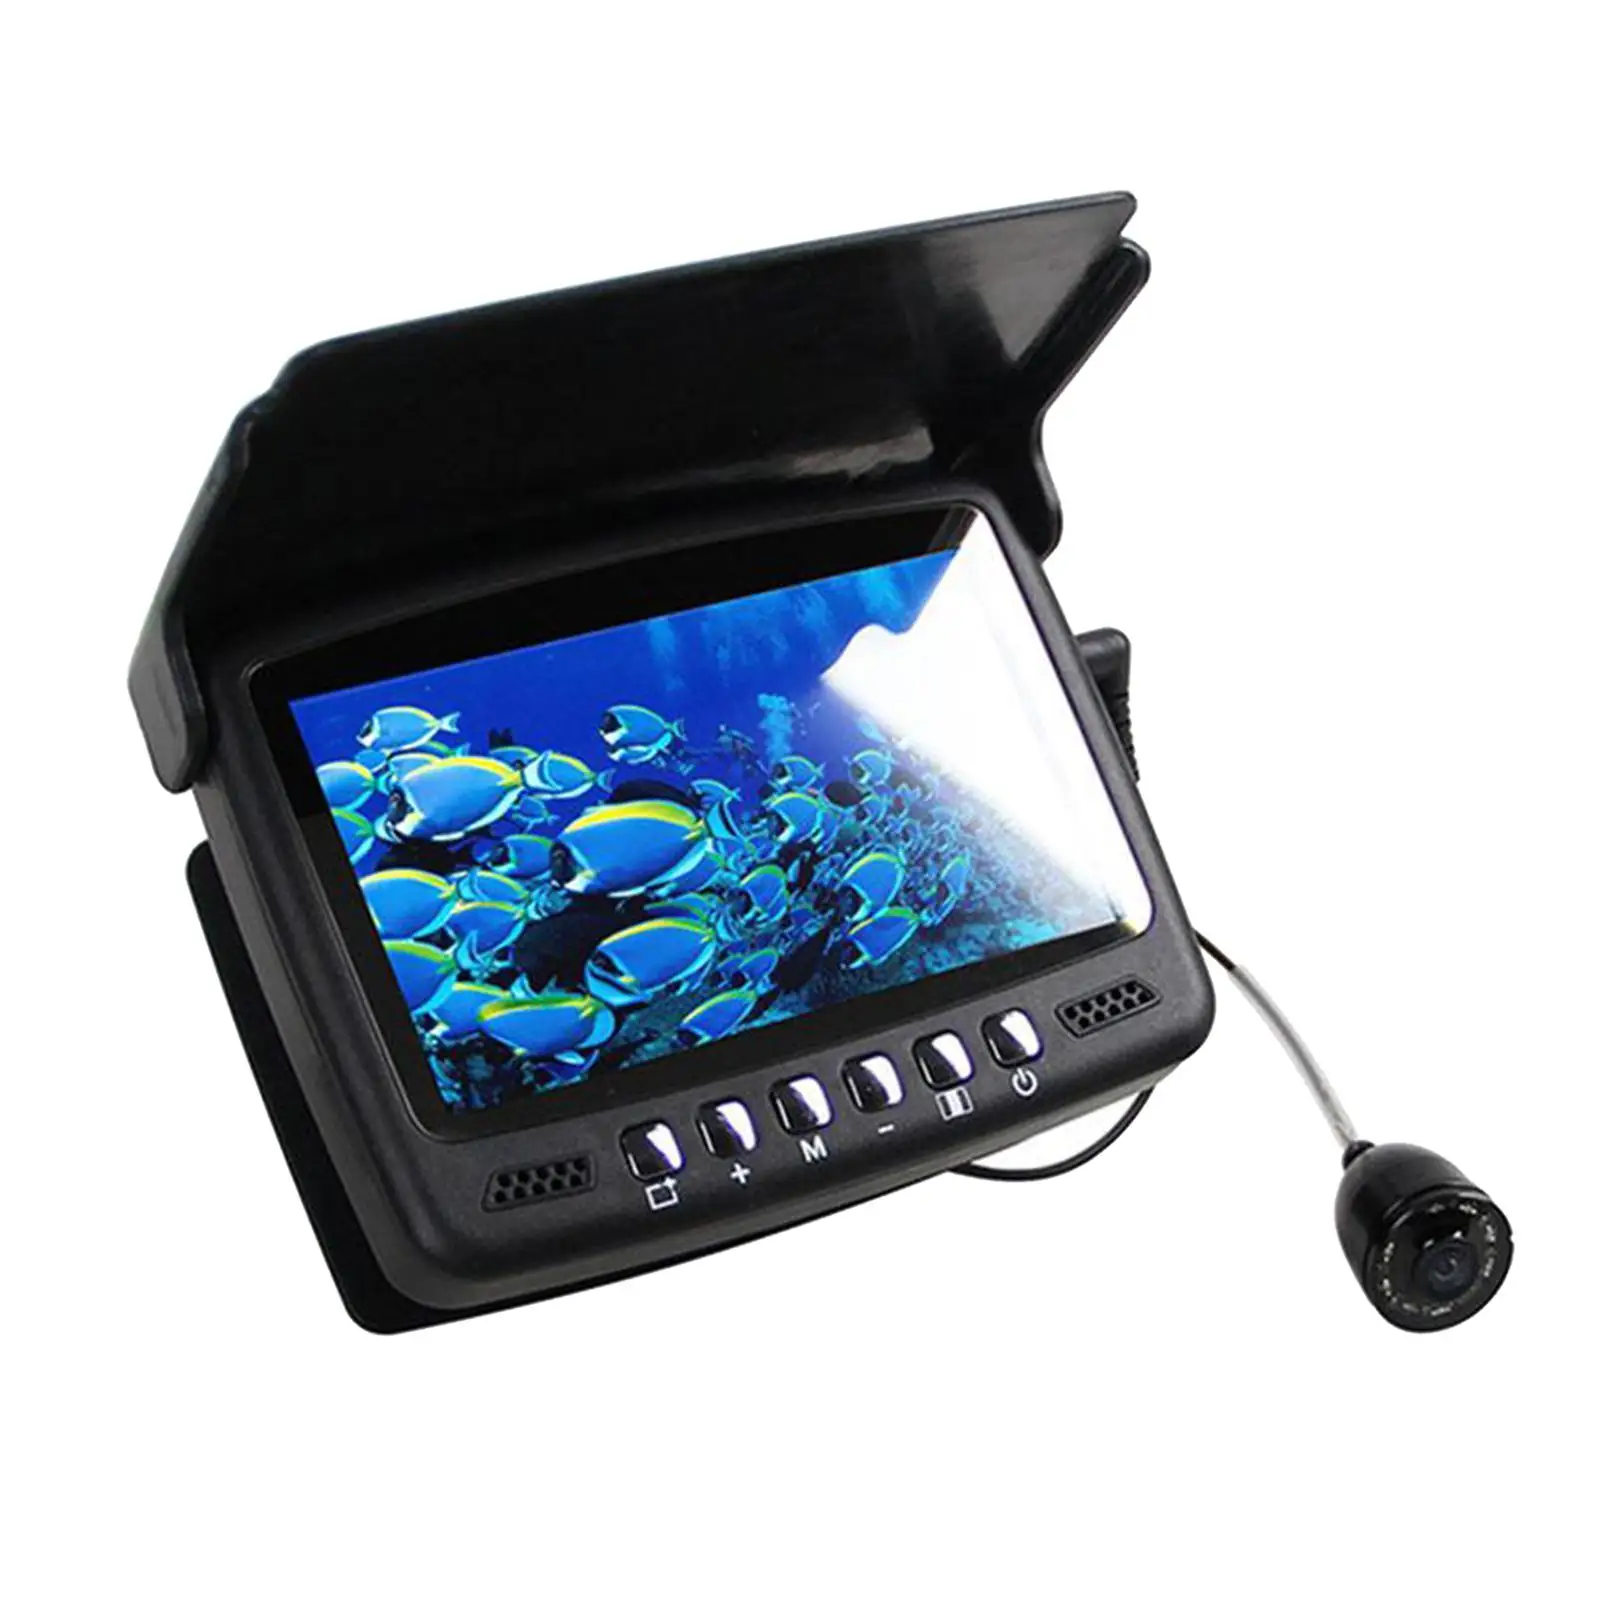 Underwater Fishing Camera DVR Fish Infrared LED Fishing Video Camera with 4.3 inch Monitor for Kayak Fishing